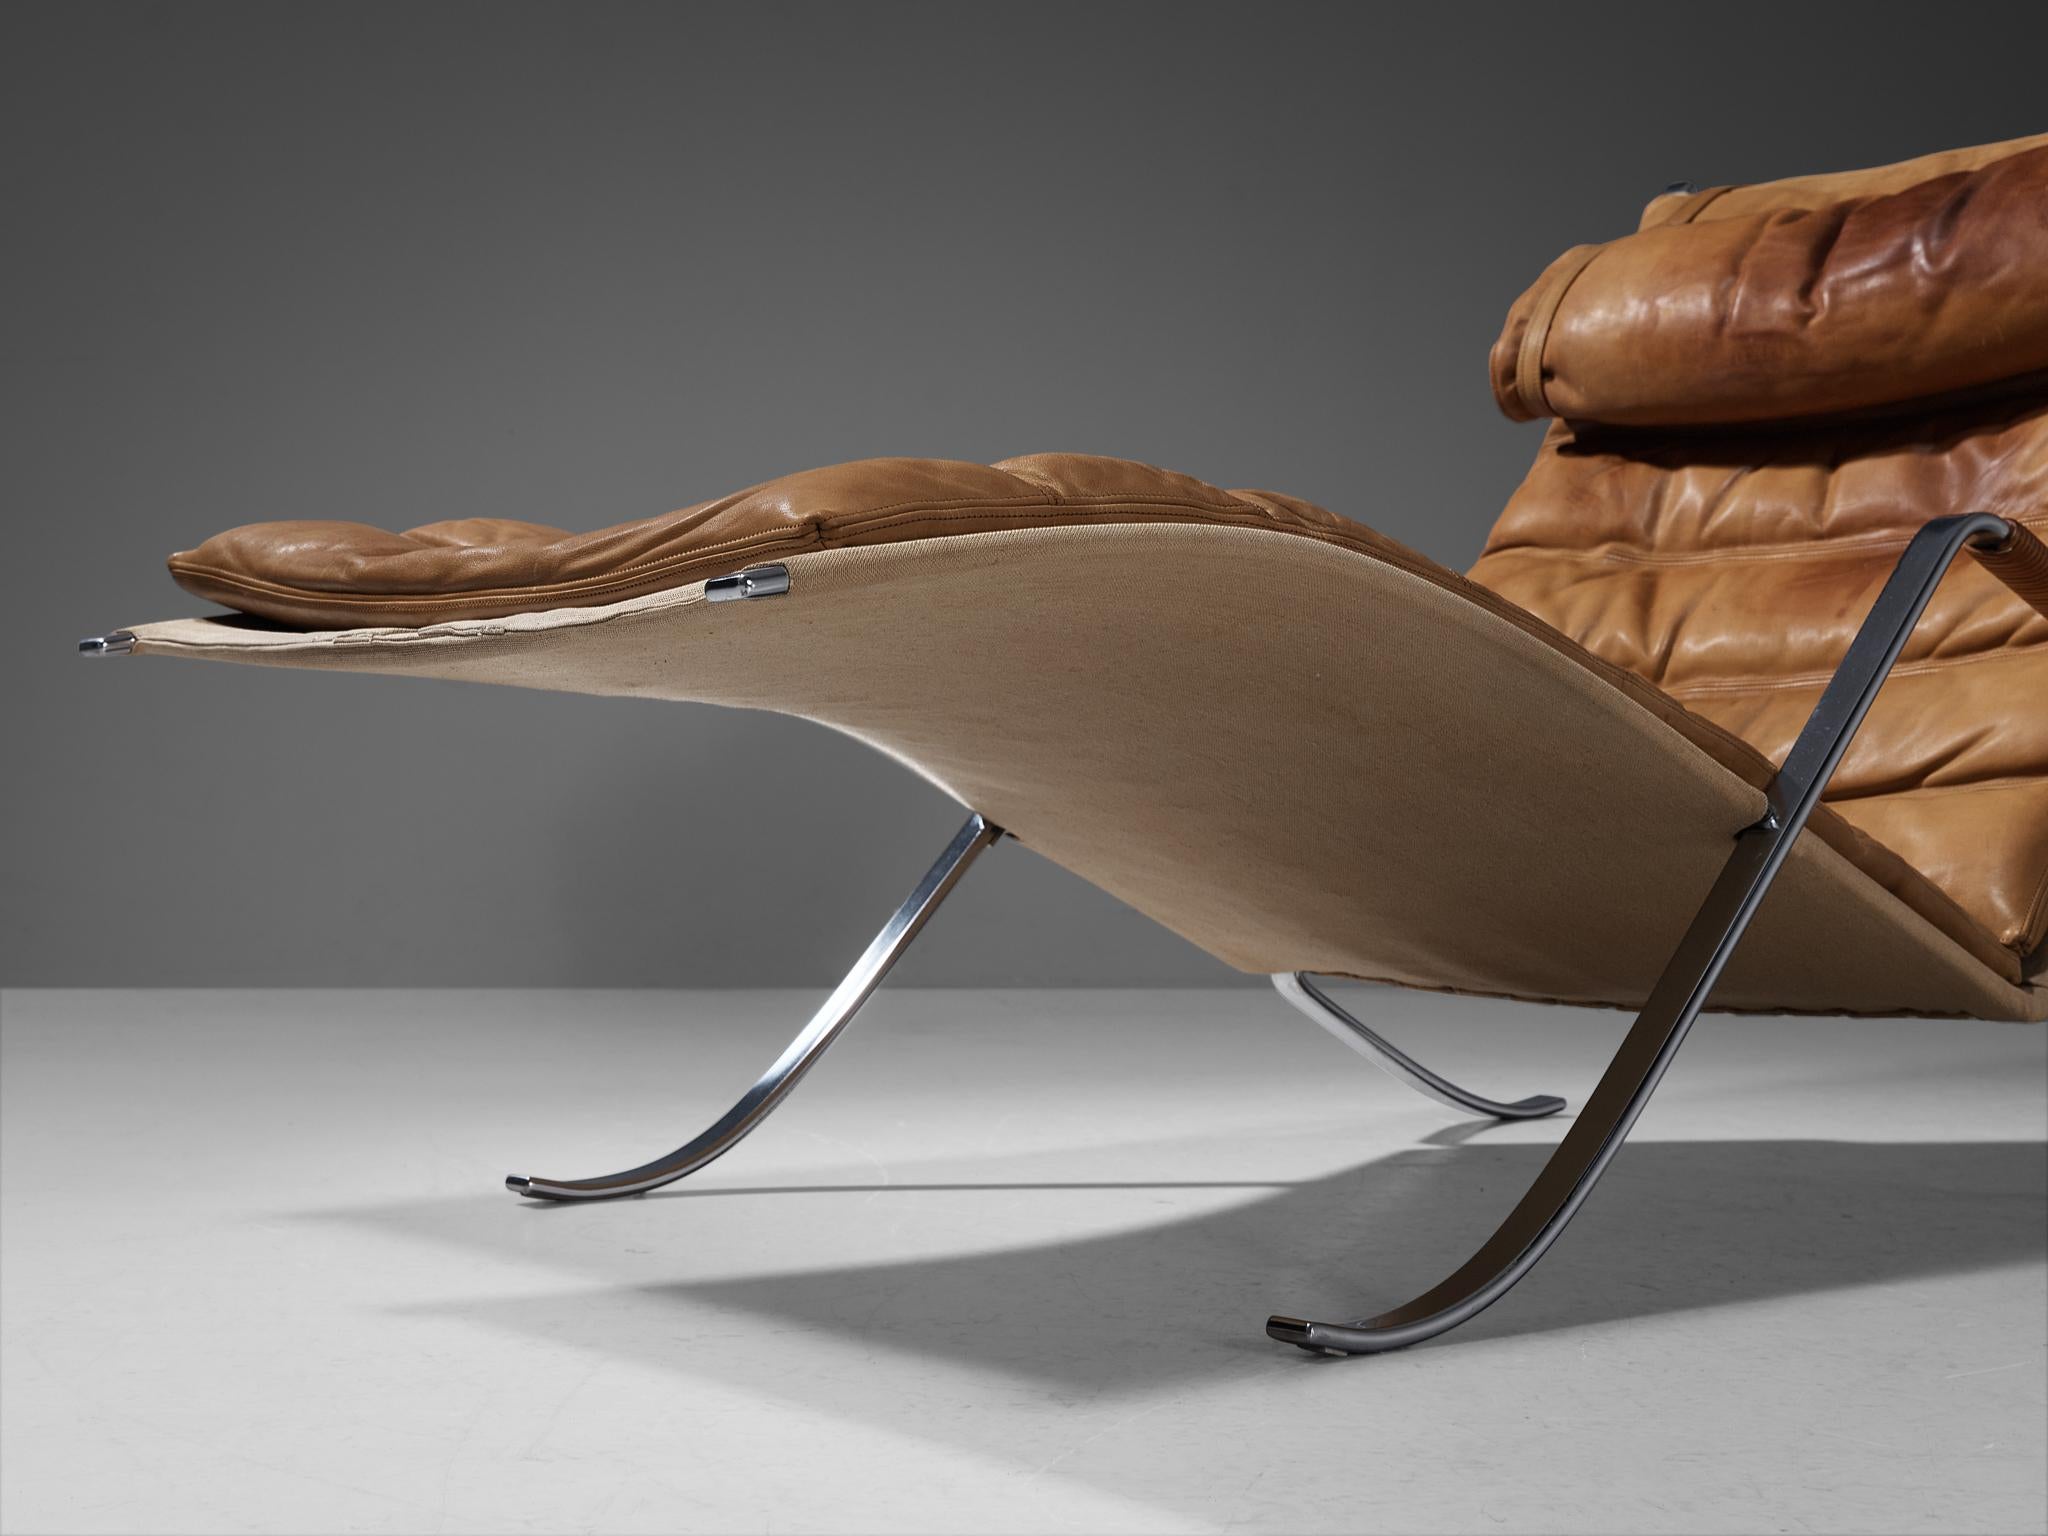 Steel Kastholm & Fabricius Early 'Grasshopper' Lounge Chair in Cognac Leather For Sale